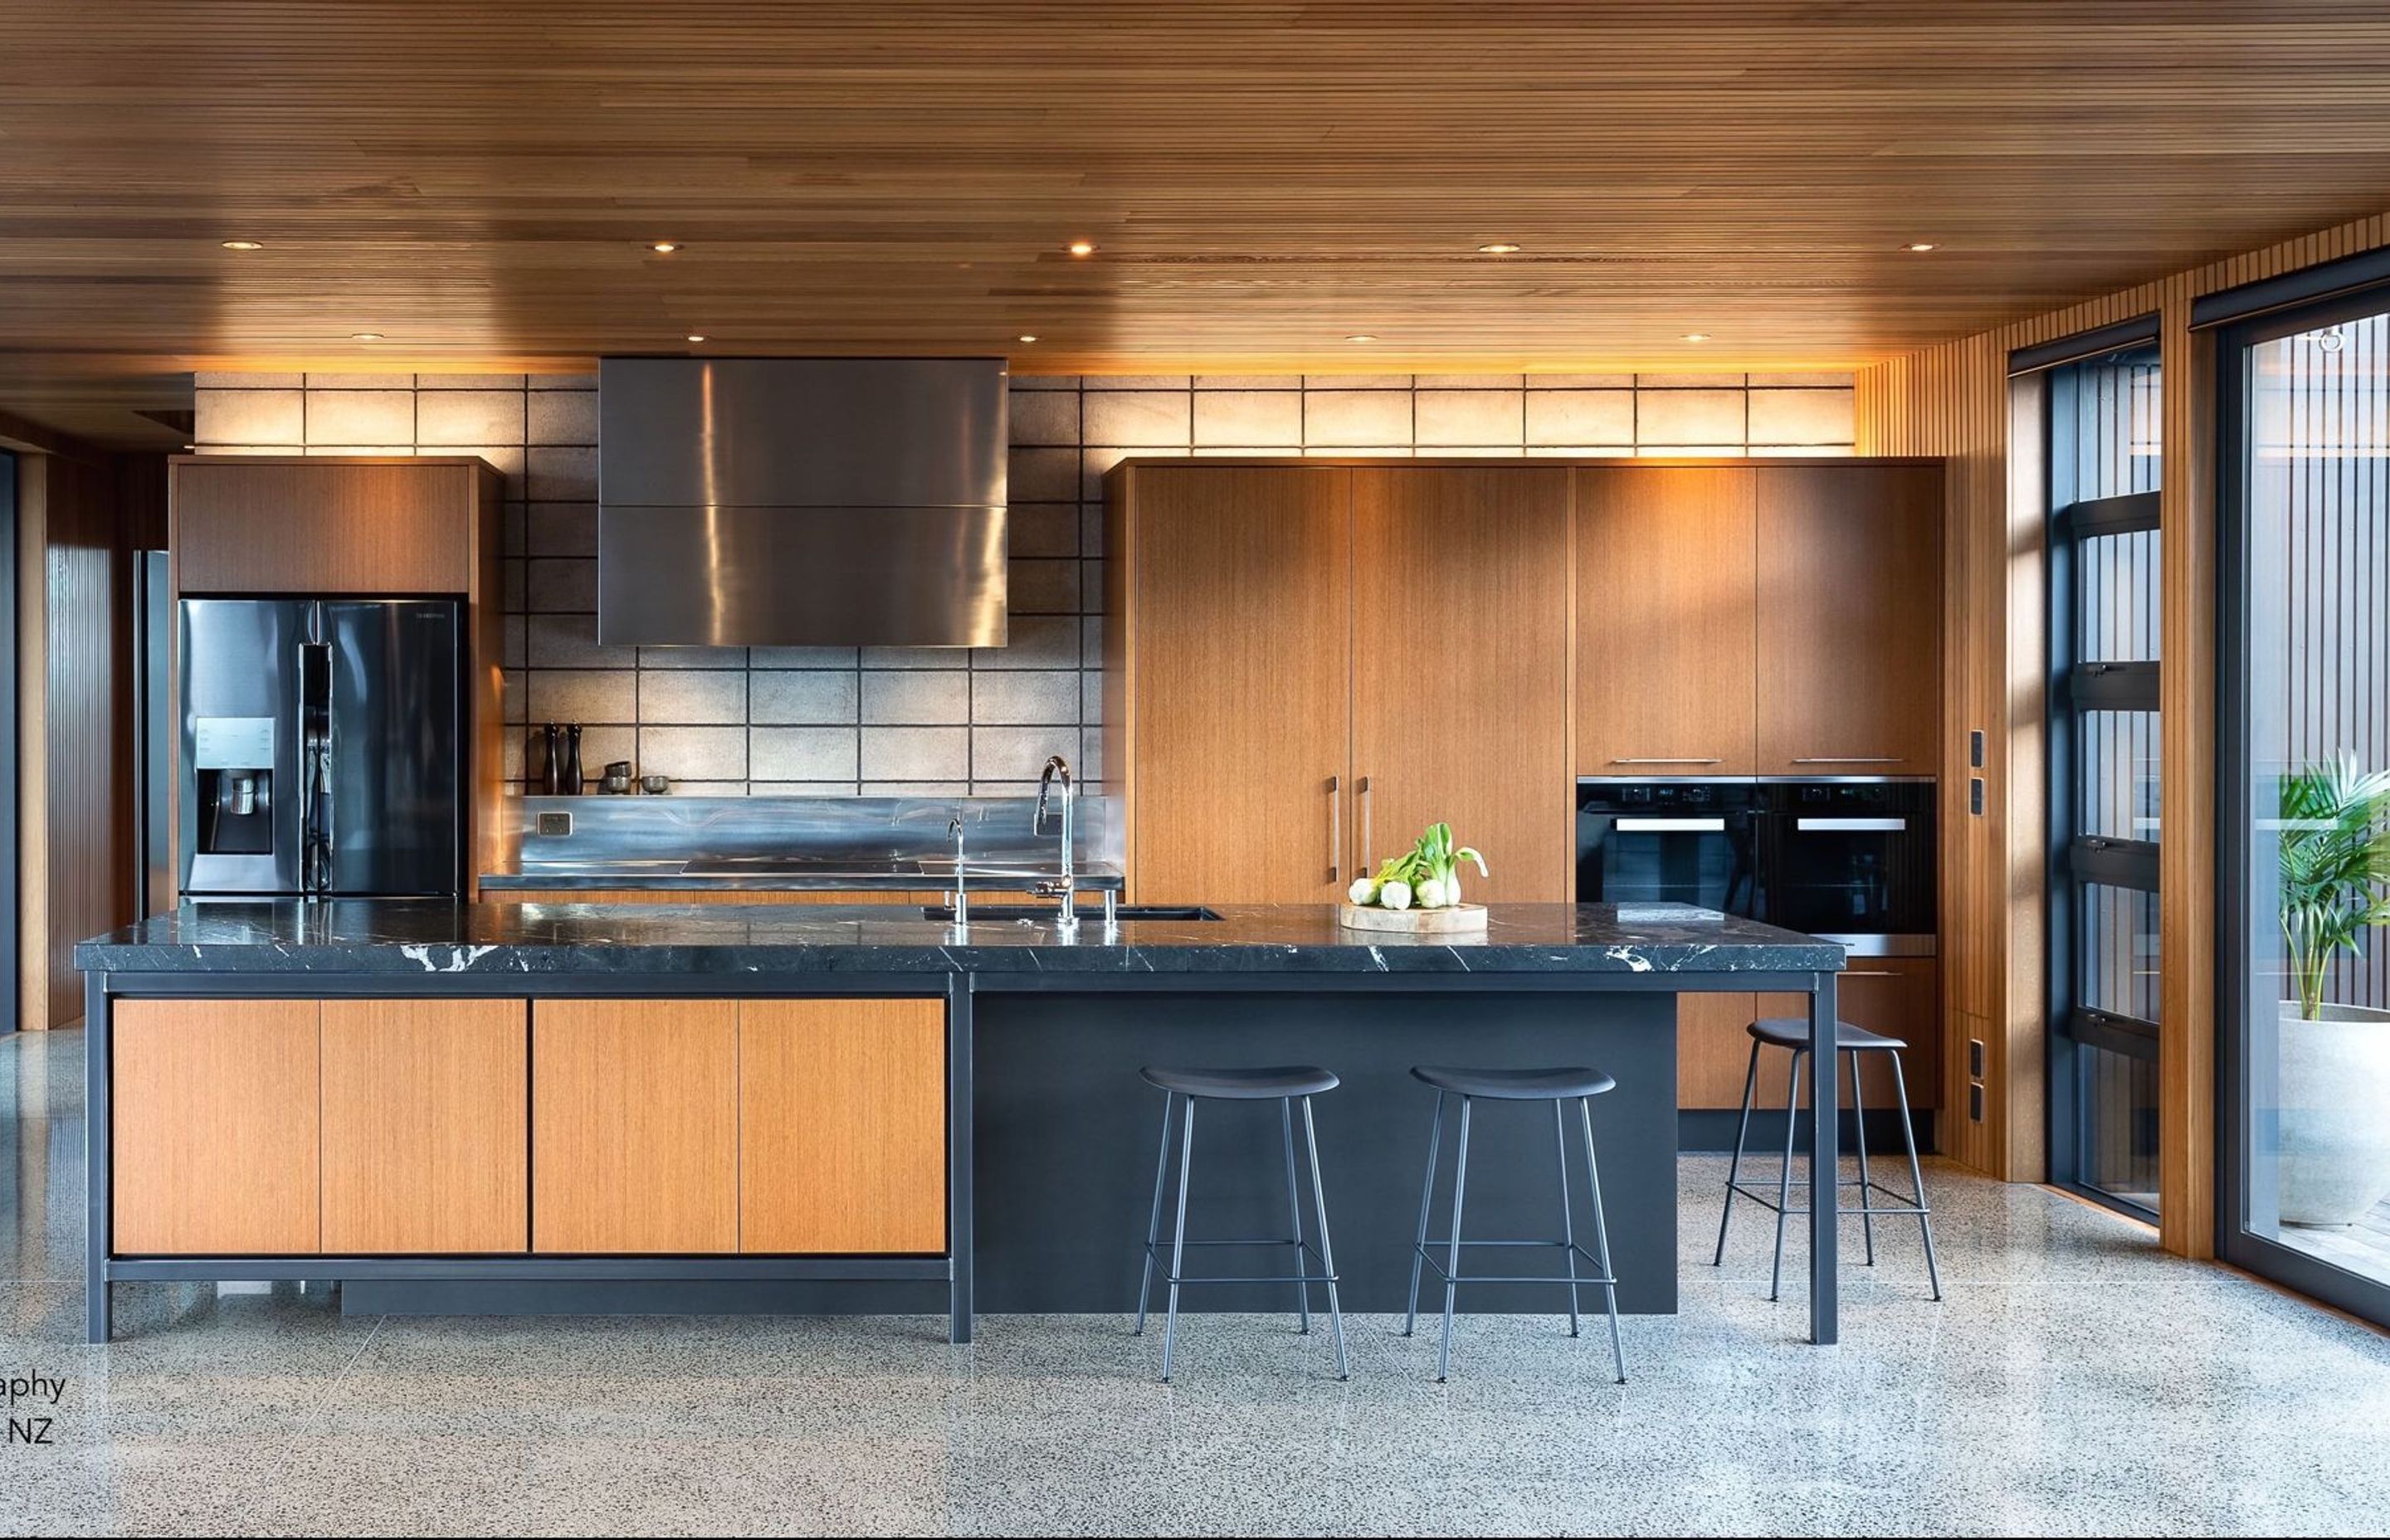 Keen to celebrate their new home’s industrial and natural materiality, our clients wanted a contemporary kitchen, designed with rawness &amp; ‘honesty’. A concrete block wall was to feature in the kitchen yet be practical